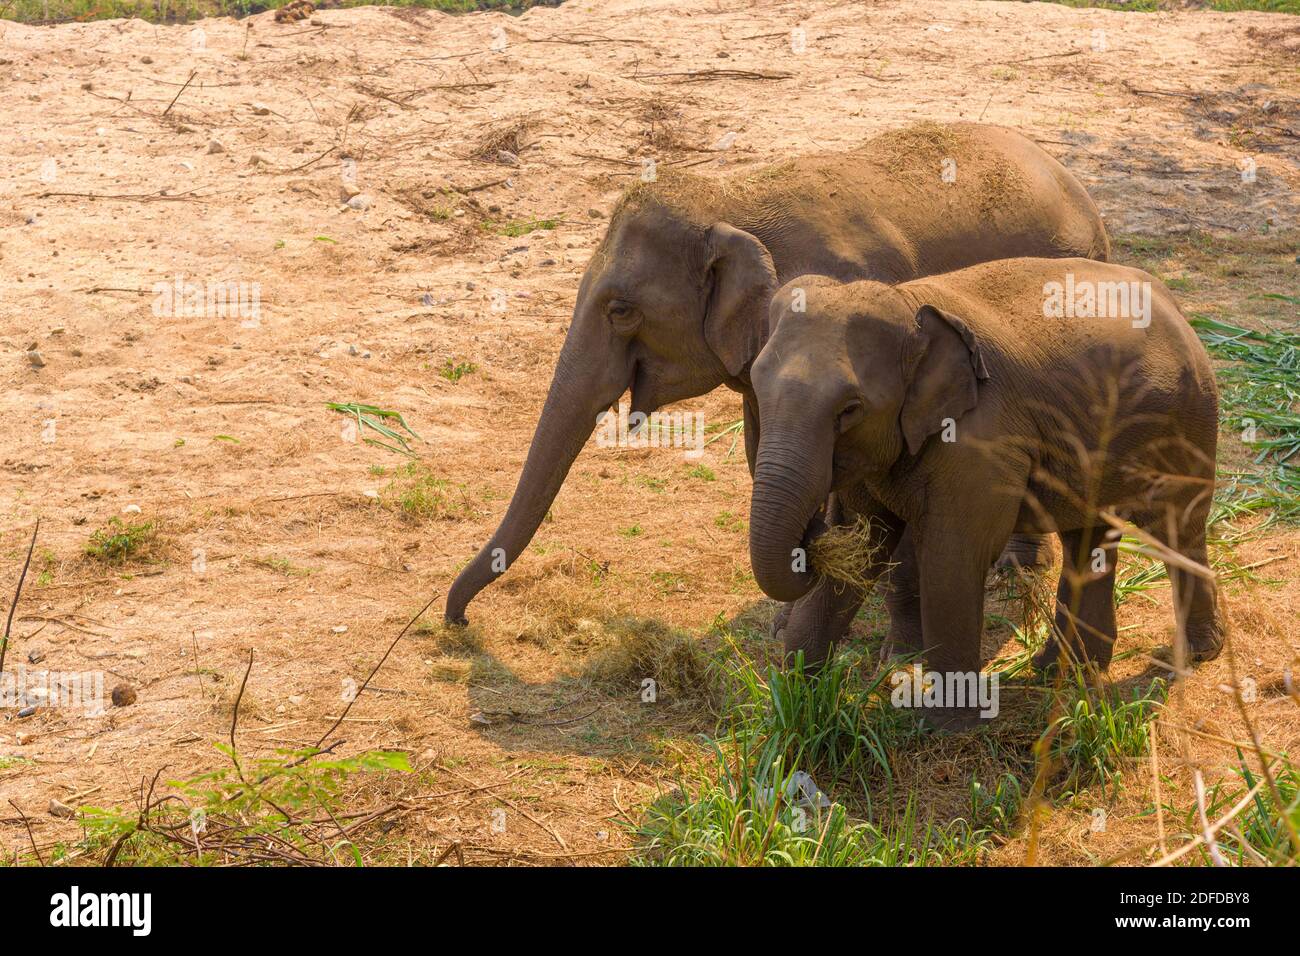 Asian Elephant (Elephas maximus) It is a Big mammal living on the ground. Stock Photo